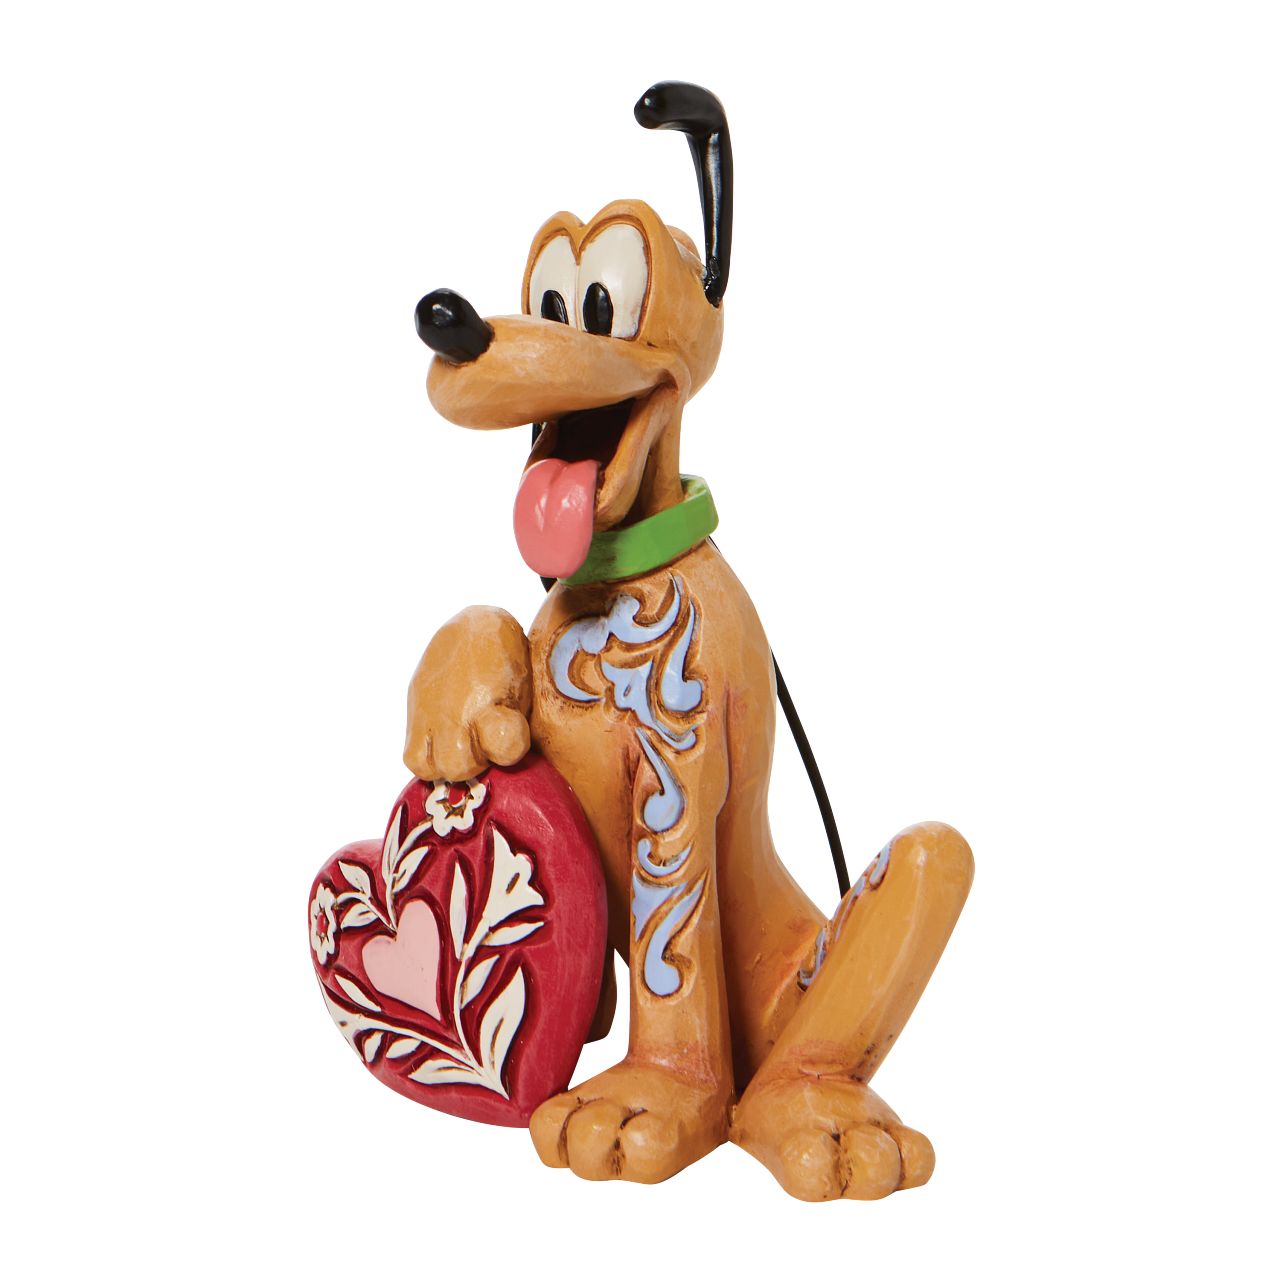 Jim Shore Pluto Heart Mini Figurine  Mickey and Minnie Mouse's pet dog, Pluto the pup, holds a rosemaled heart under his yellow paw in this lively Jim Shore figurine from Disney Traditions. With one ear raised inquisitively, Pluto wears a giddy expression in this delightful miniature.